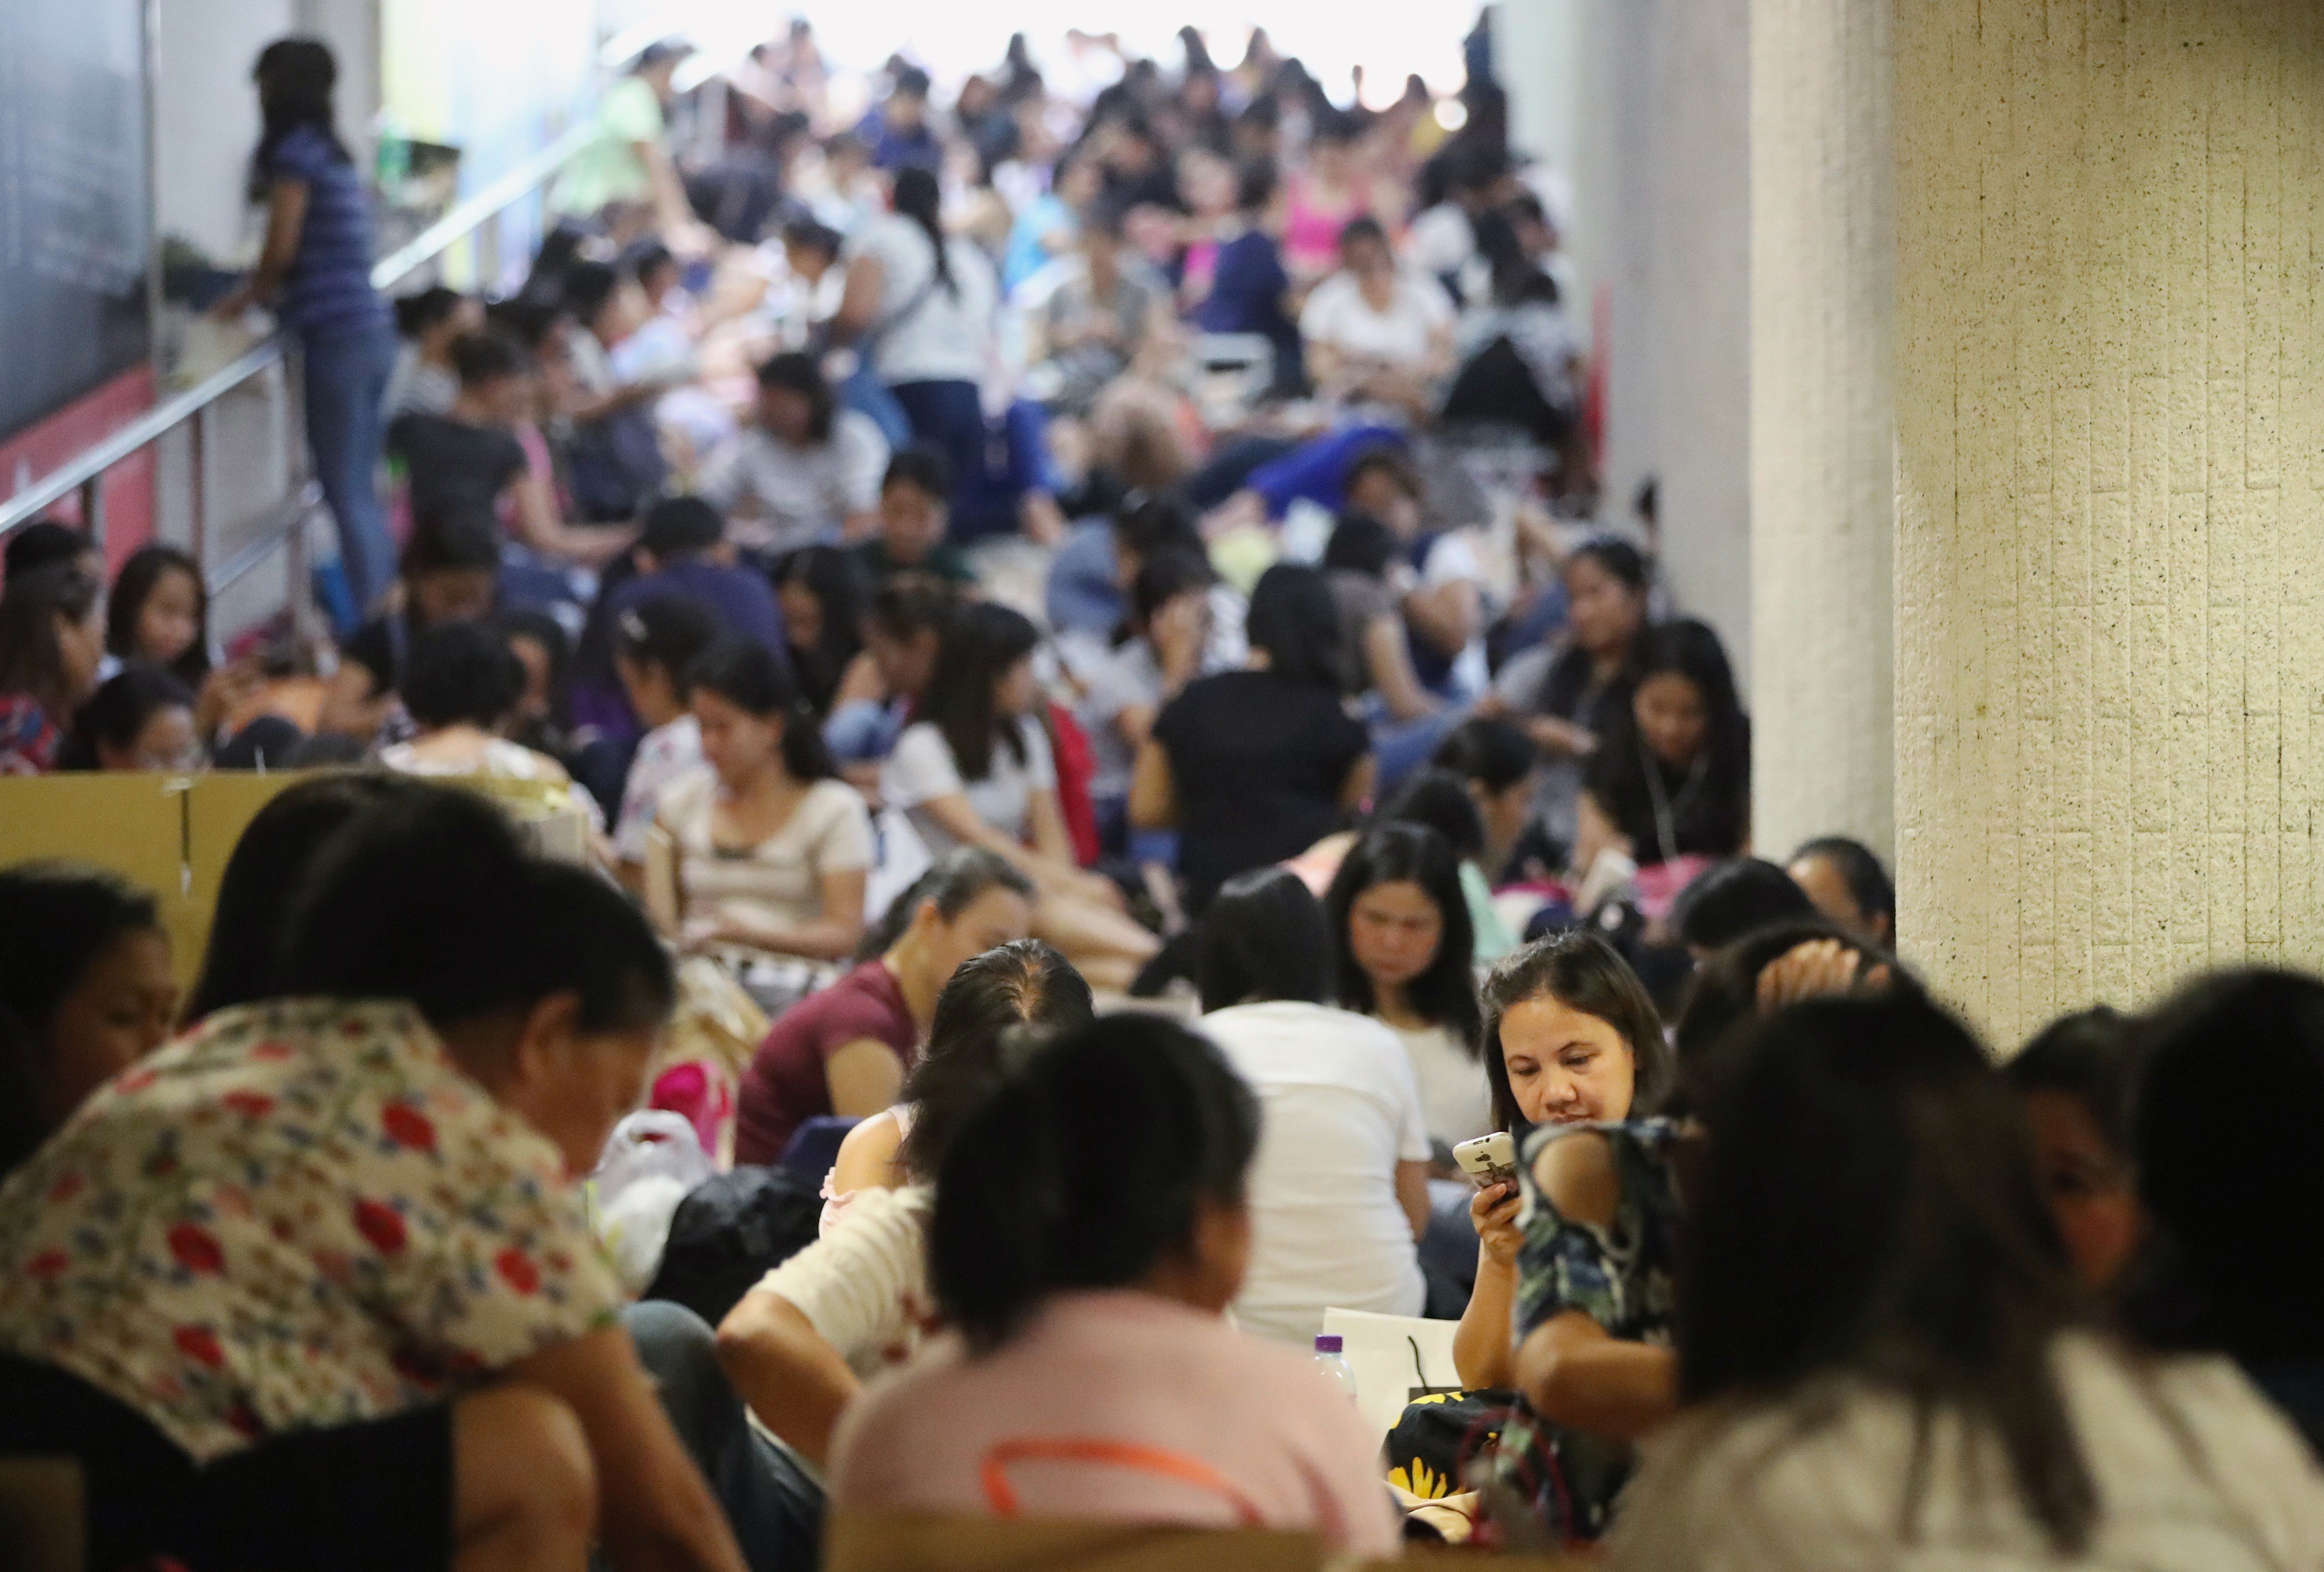 Domestic workers gathered in Central on a public holiday. 17JUN18 SCMP / Edward Wong